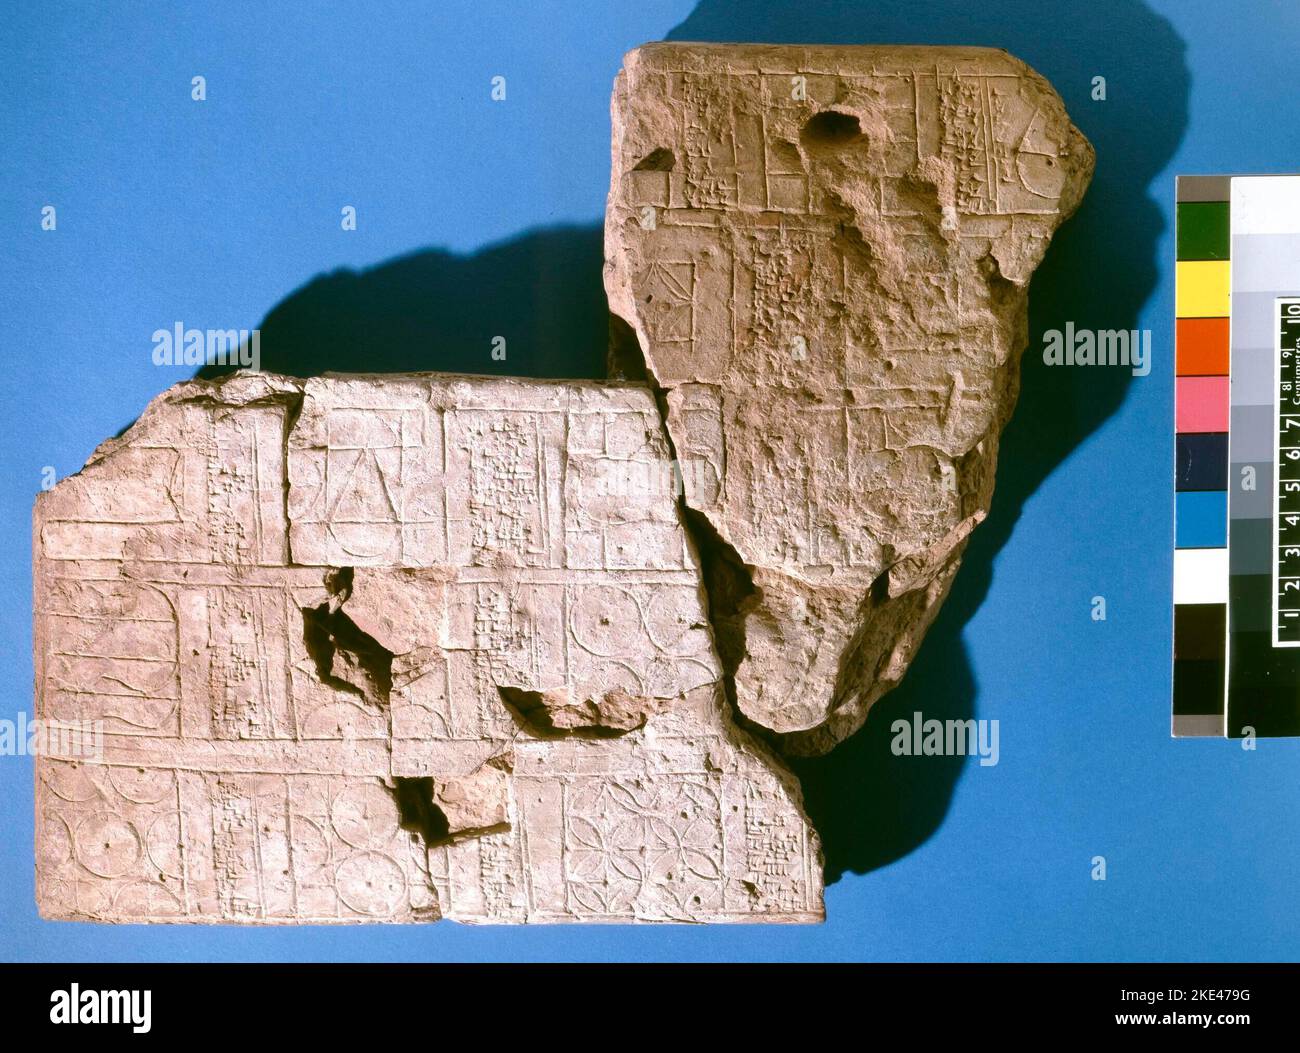 stone tablet map museum